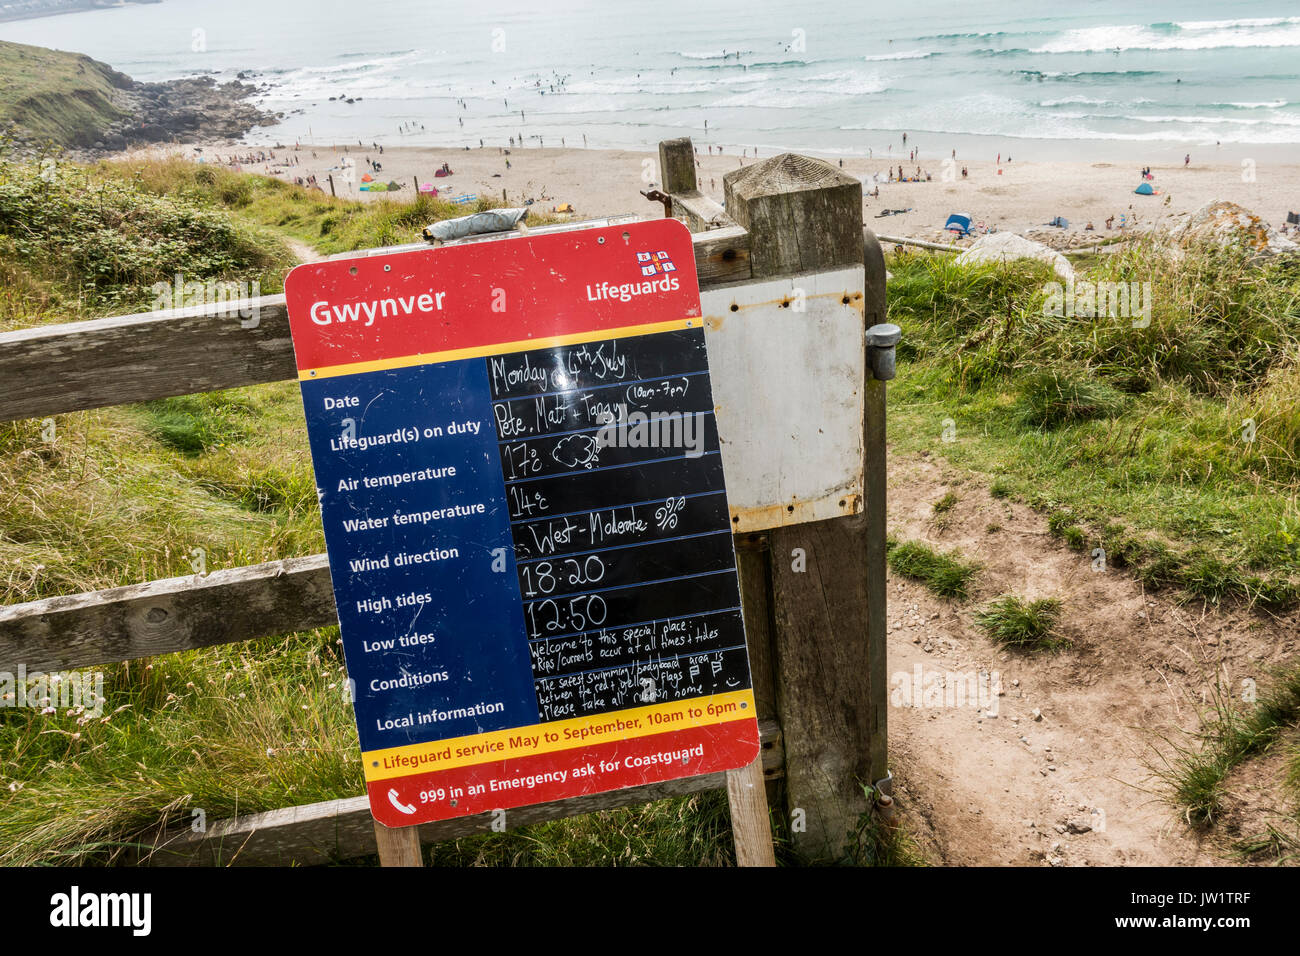 Lifeguard notice board with details of tides, temperature, etc, at Gwynver Beach, near Penzance, Cornwall, England, UK. Stock Photo